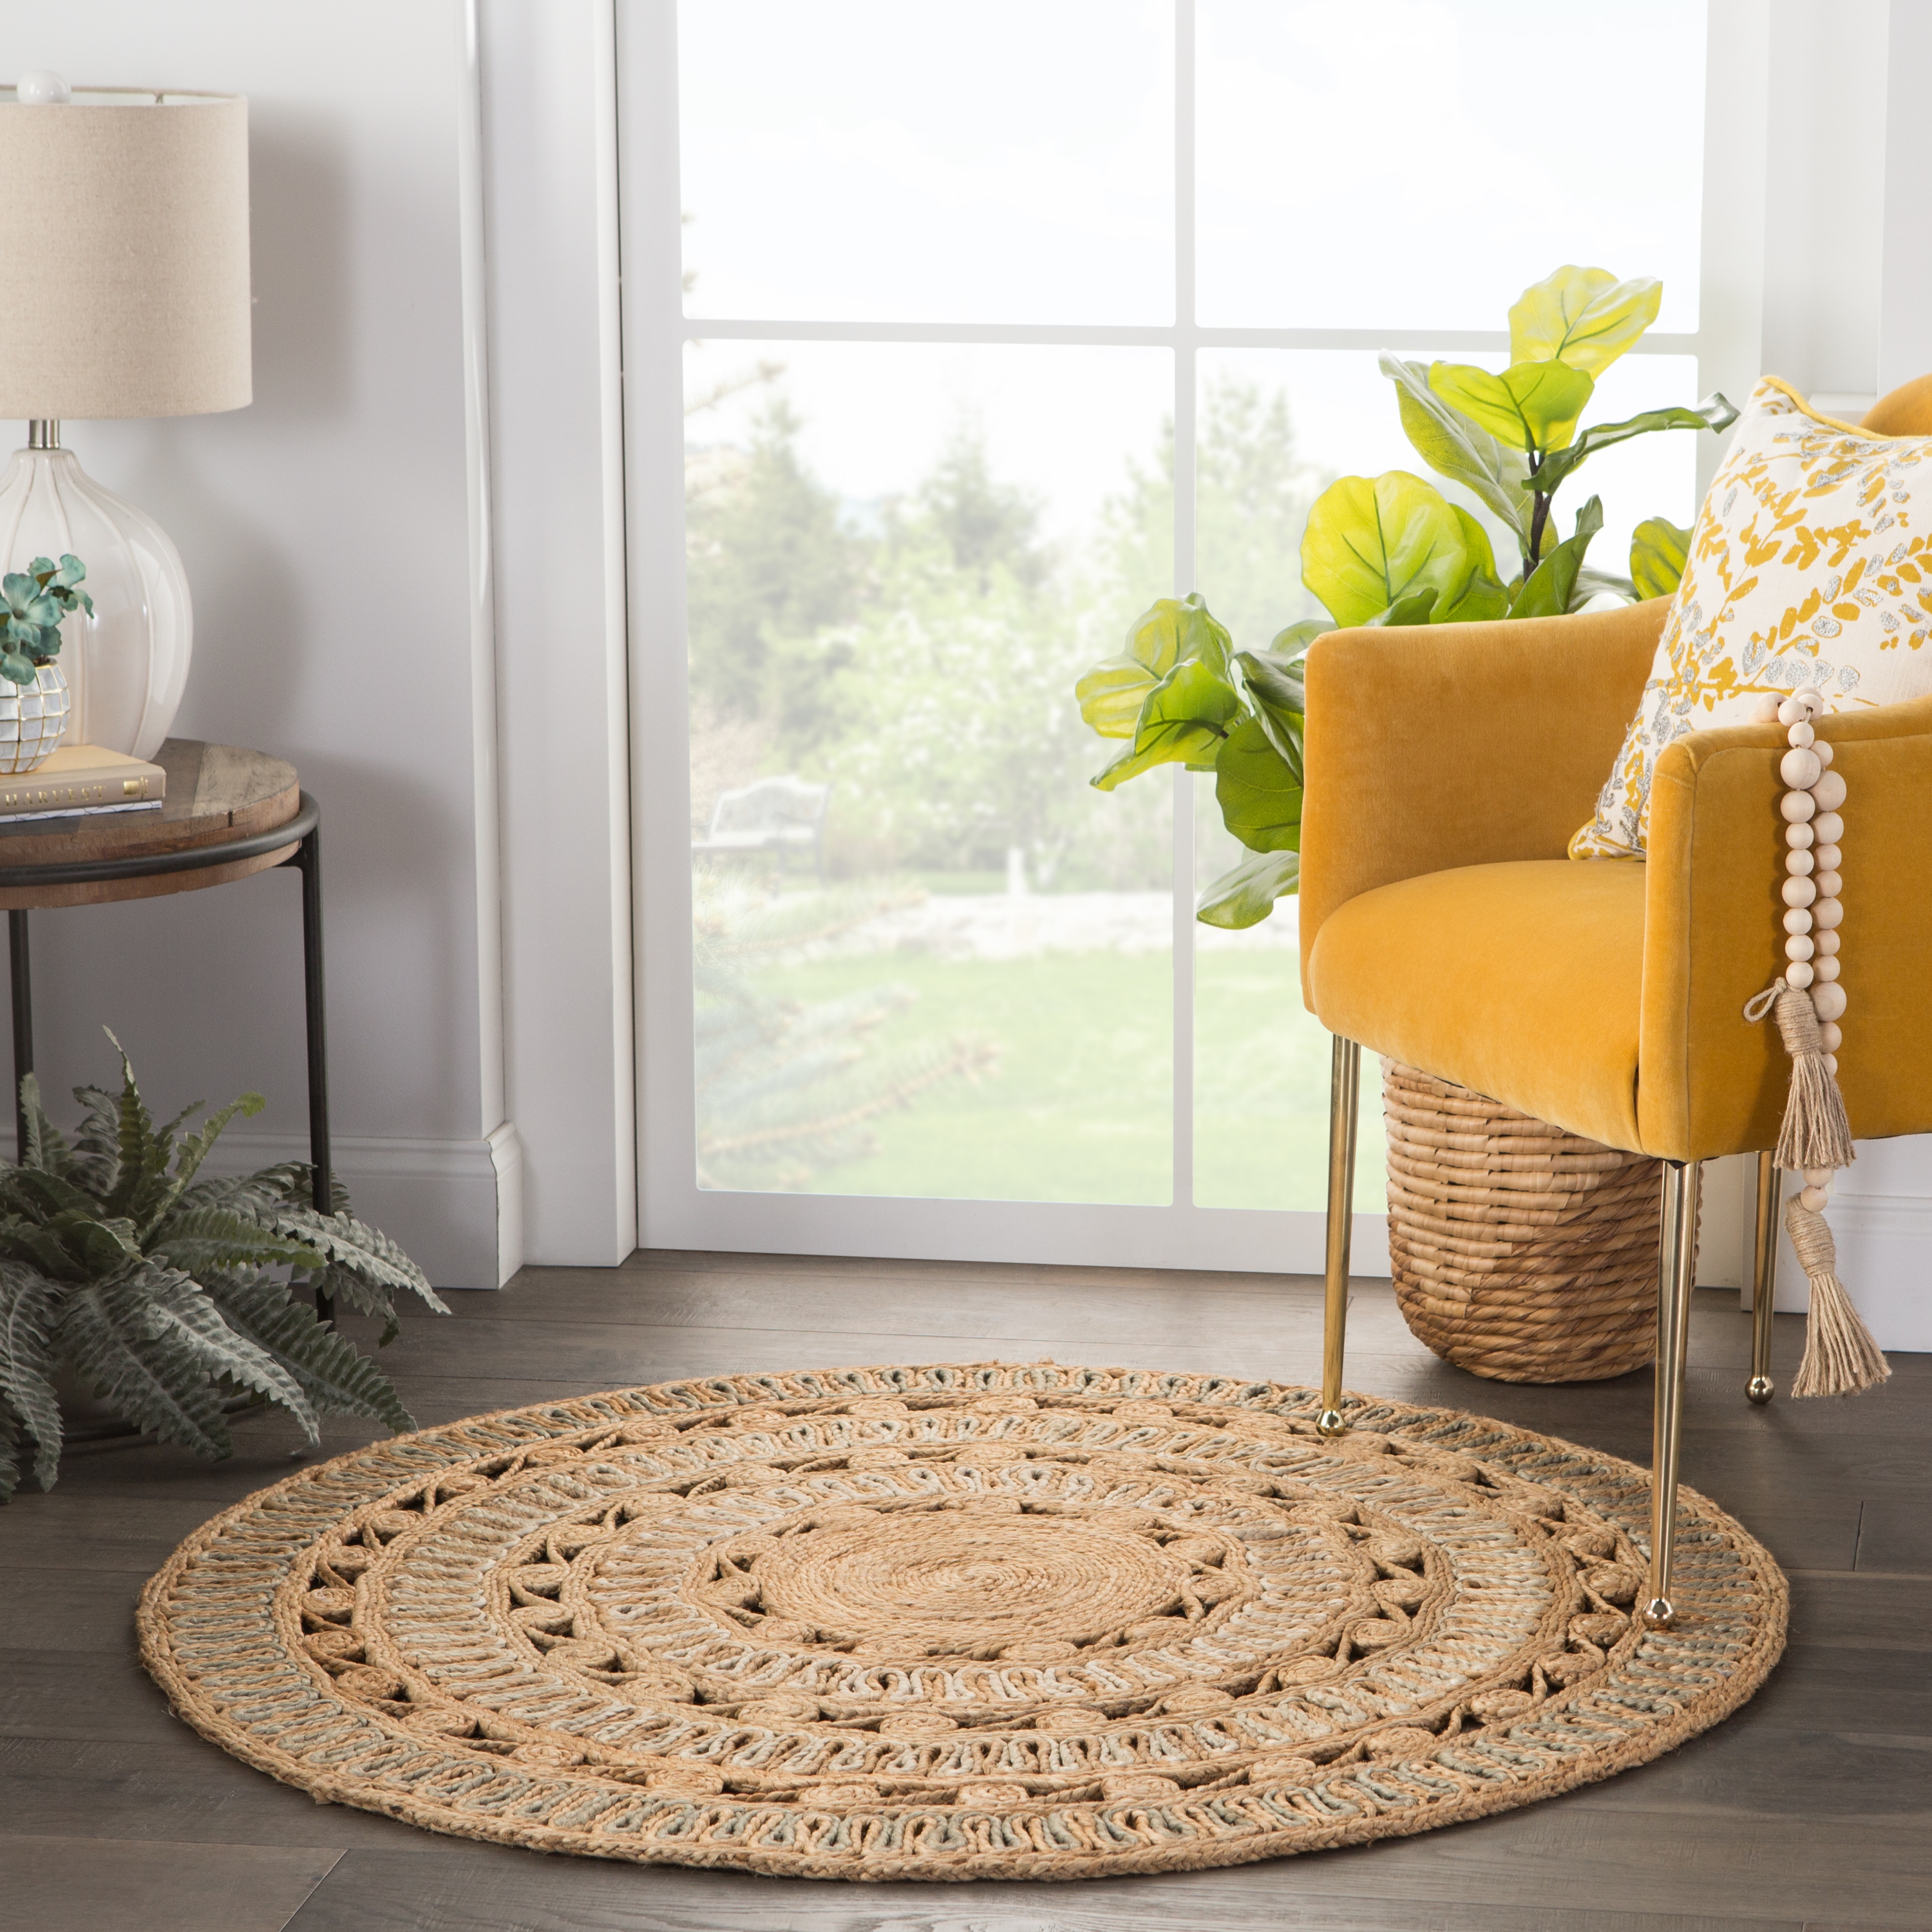 Peony Natural Dots Beige/ Gray Round Area Rug (8'X8') - Image 2